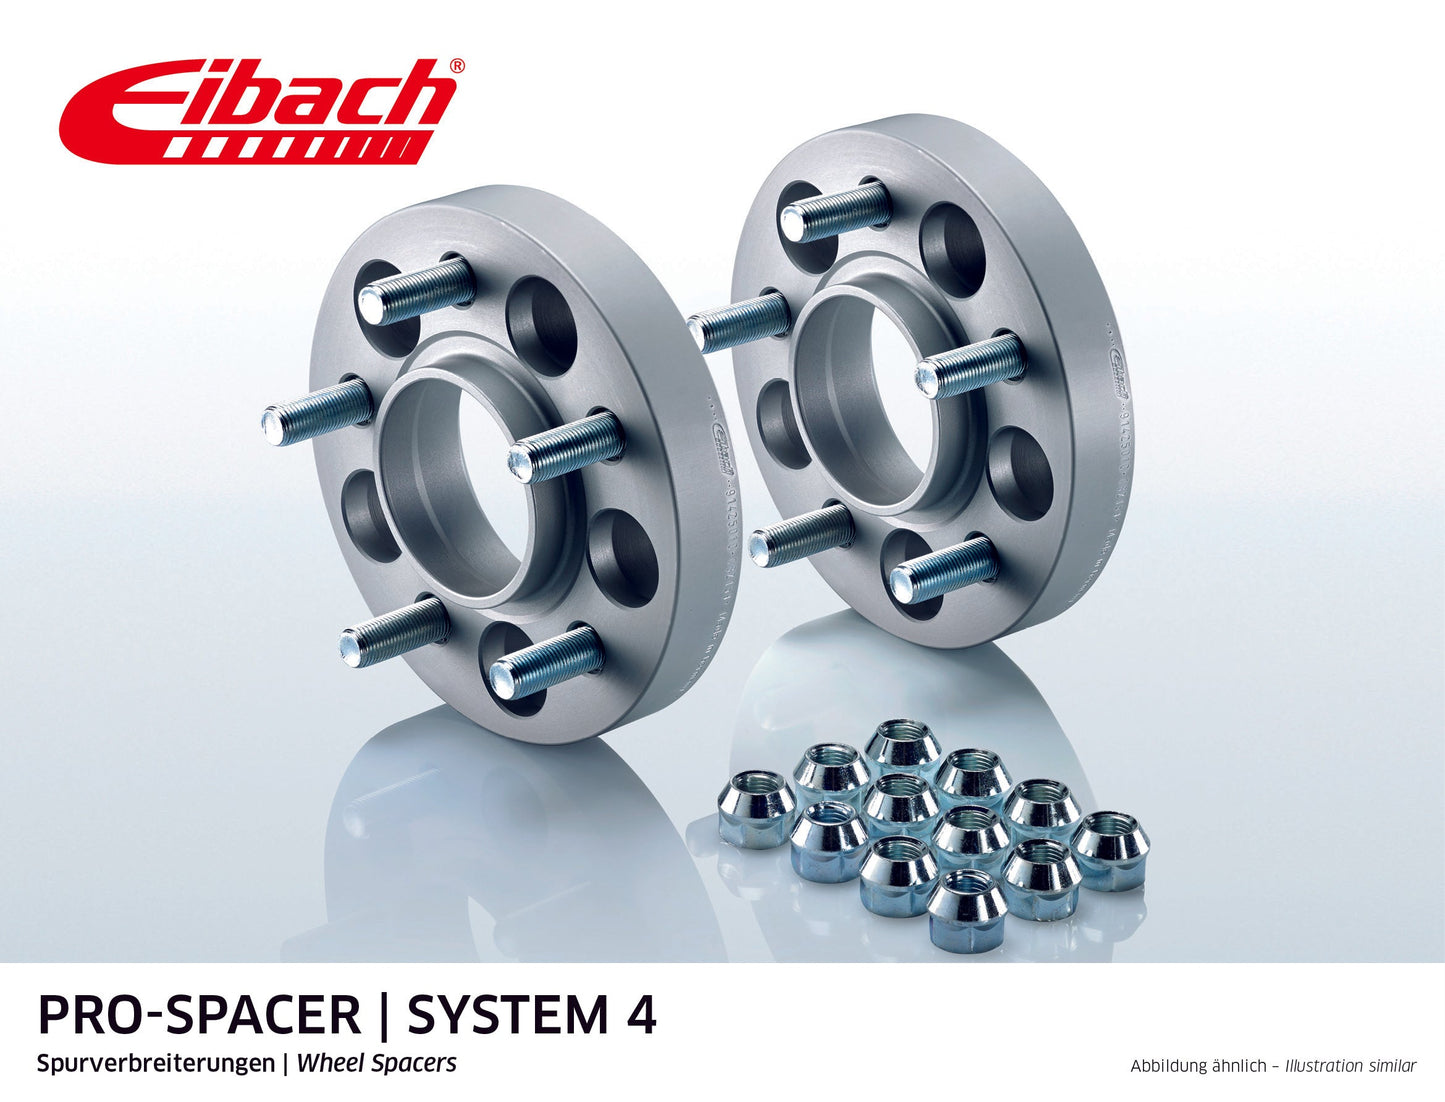 Eibach Pro-Spacer Kit (Pair Of Spacers) 30mm Per Spacer (System 4) S90-4-30-017 (Silver) at £188.70